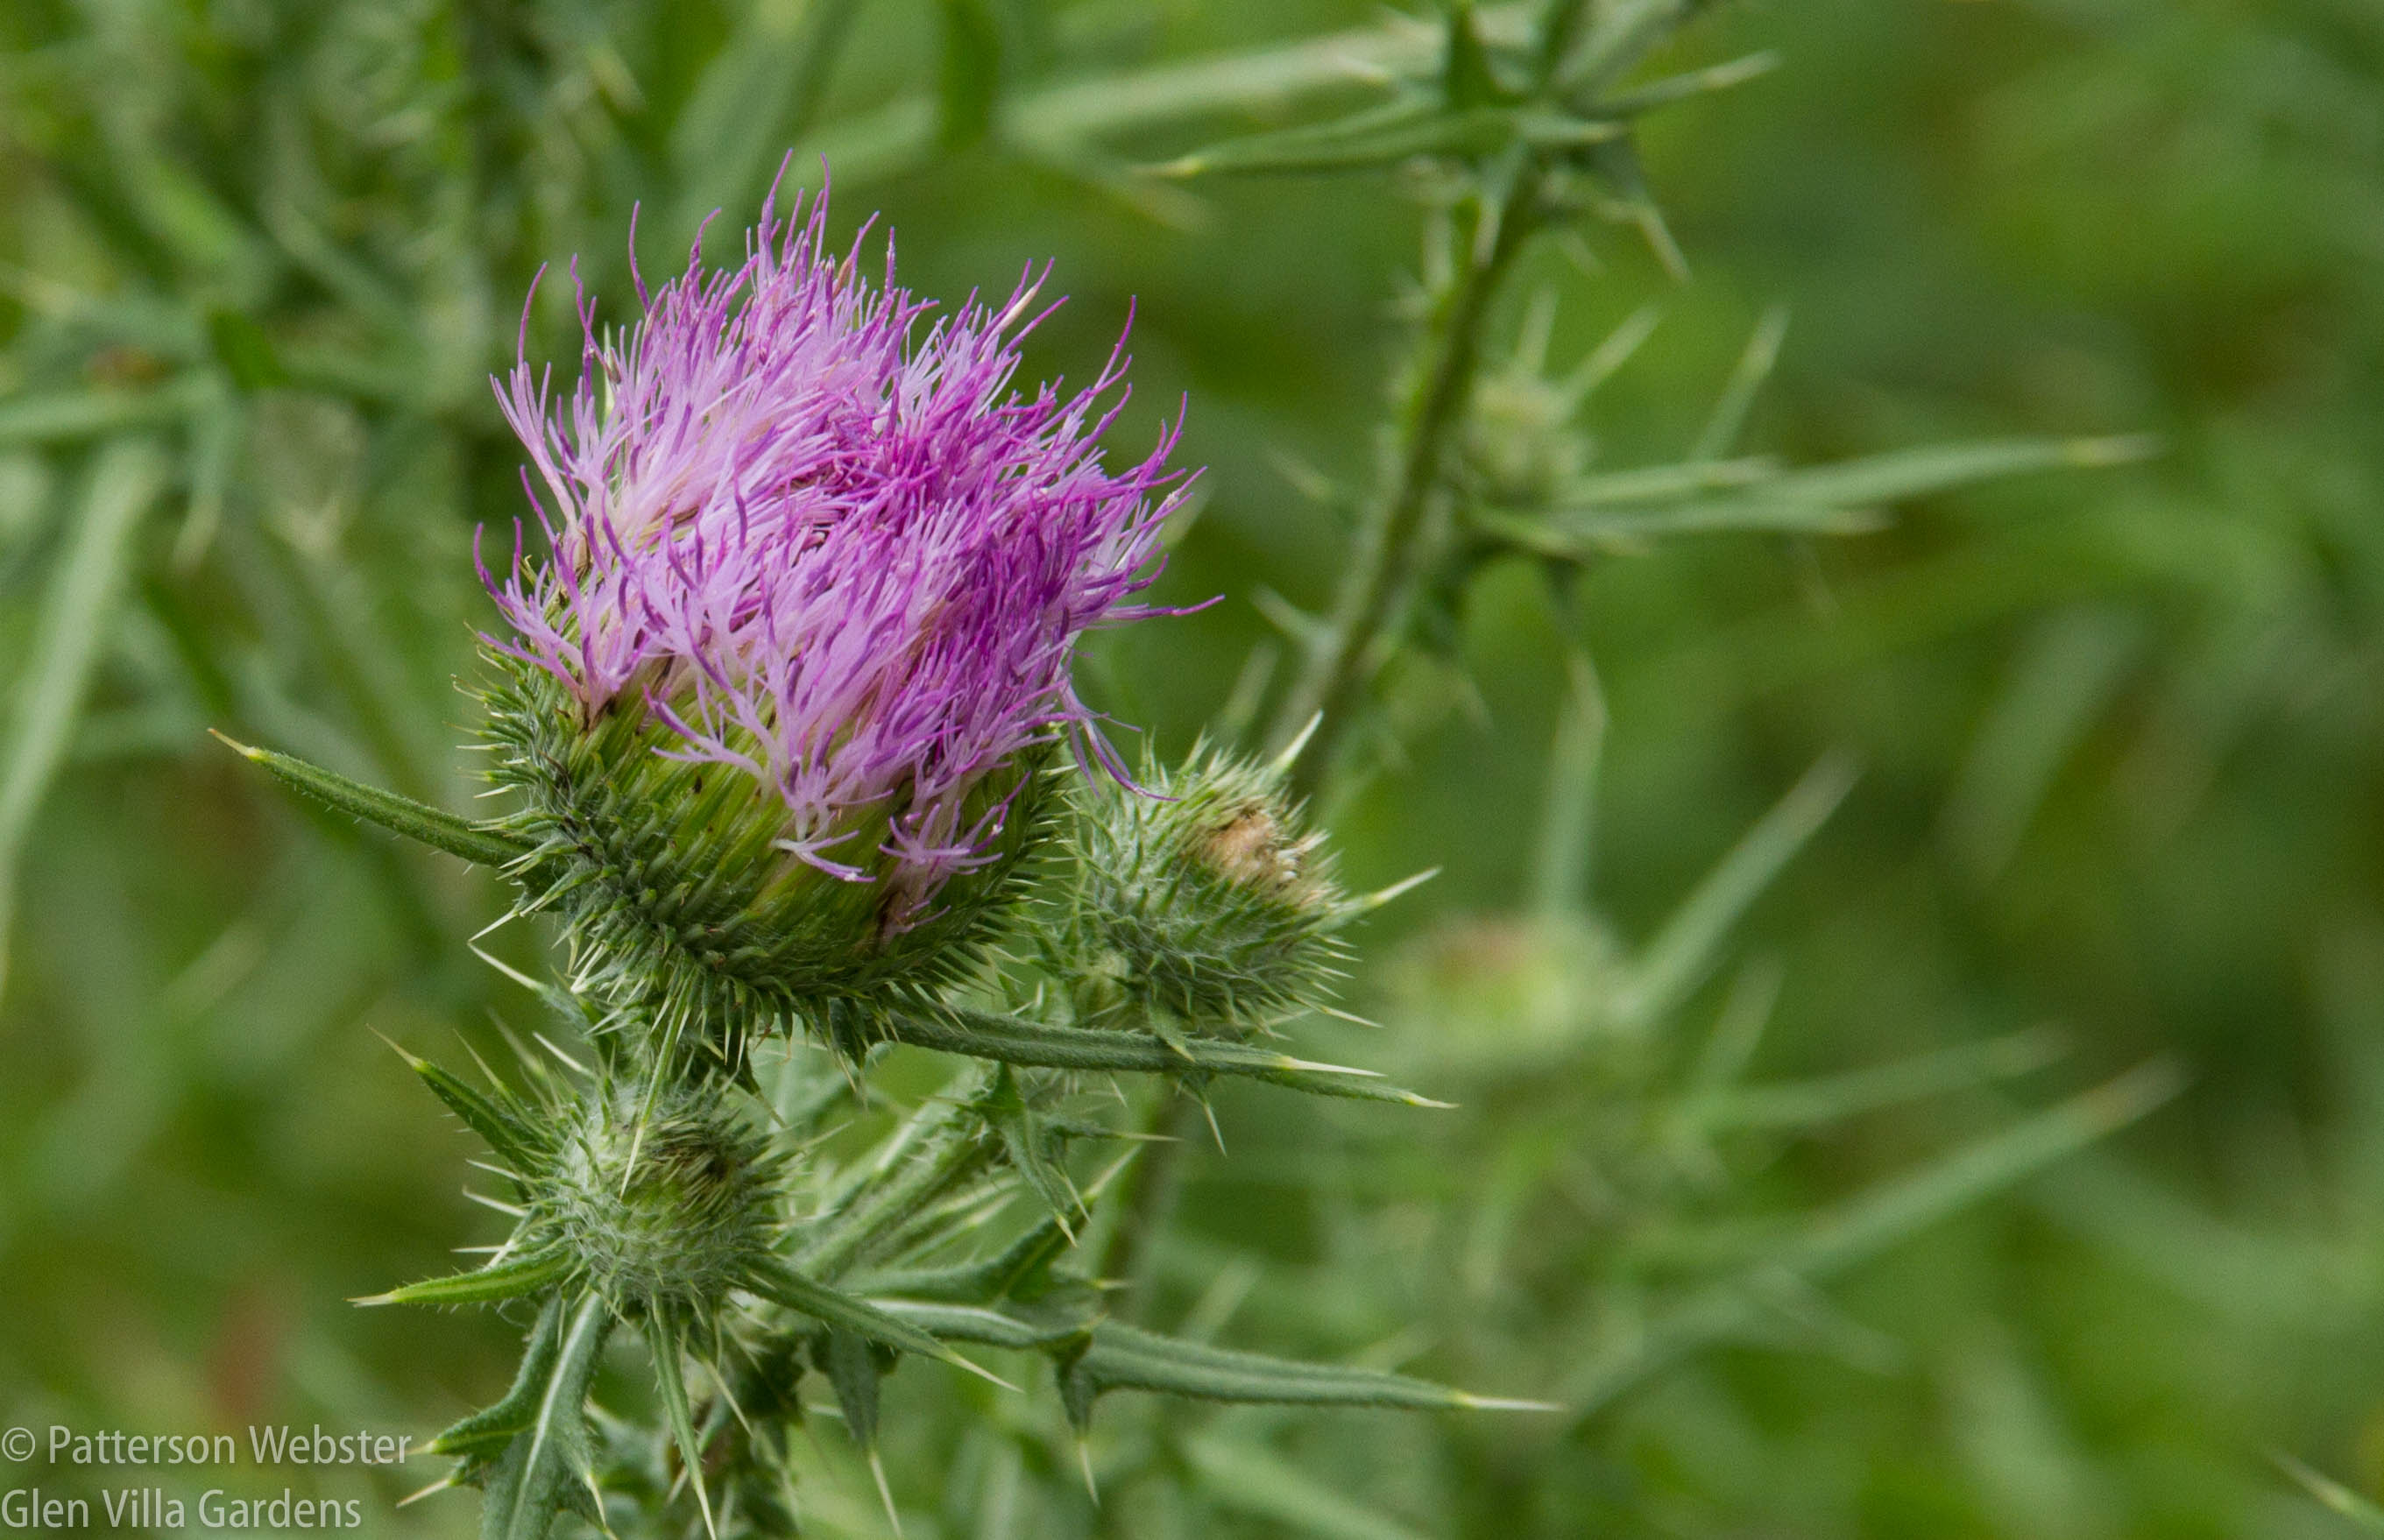 Canadian thistle blooms in sunny spots.